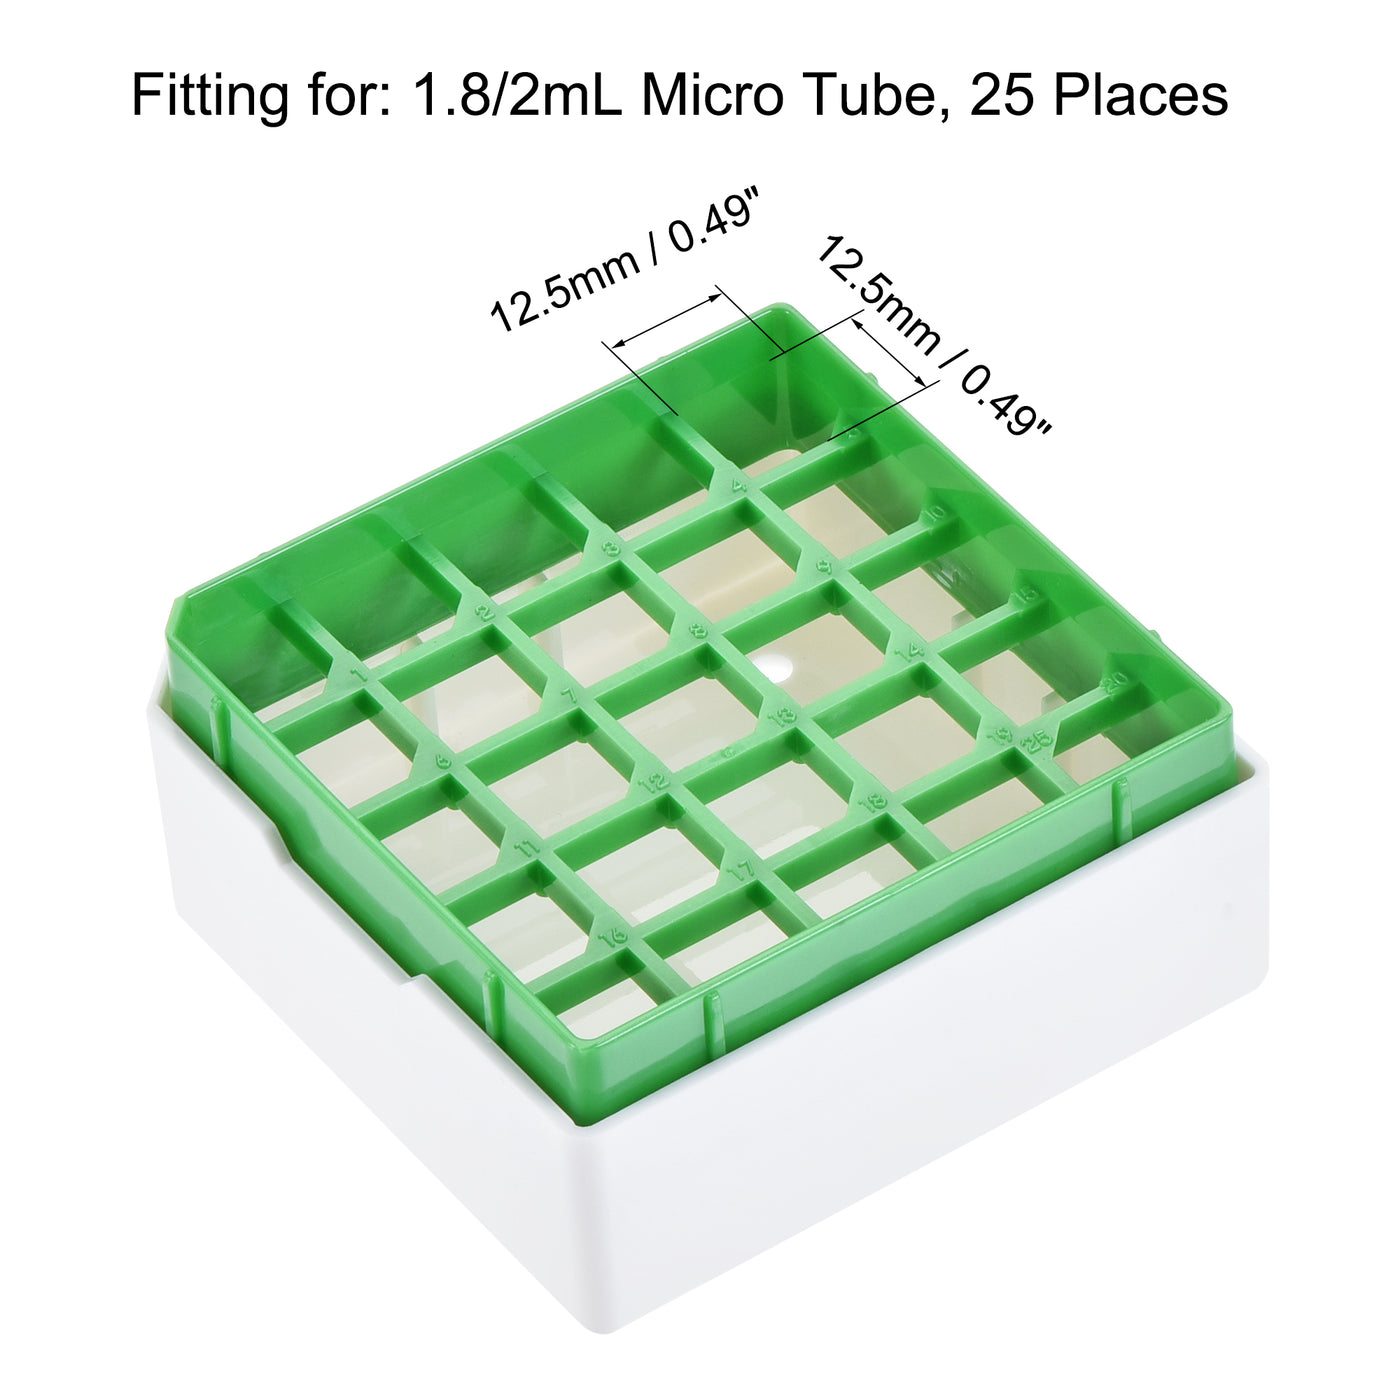 uxcell Uxcell Freezer Tube Box 25 Places Polypropylene Holder Rack for 1.8/2ml Microcentrifuge Tubes, Green 4Pcs